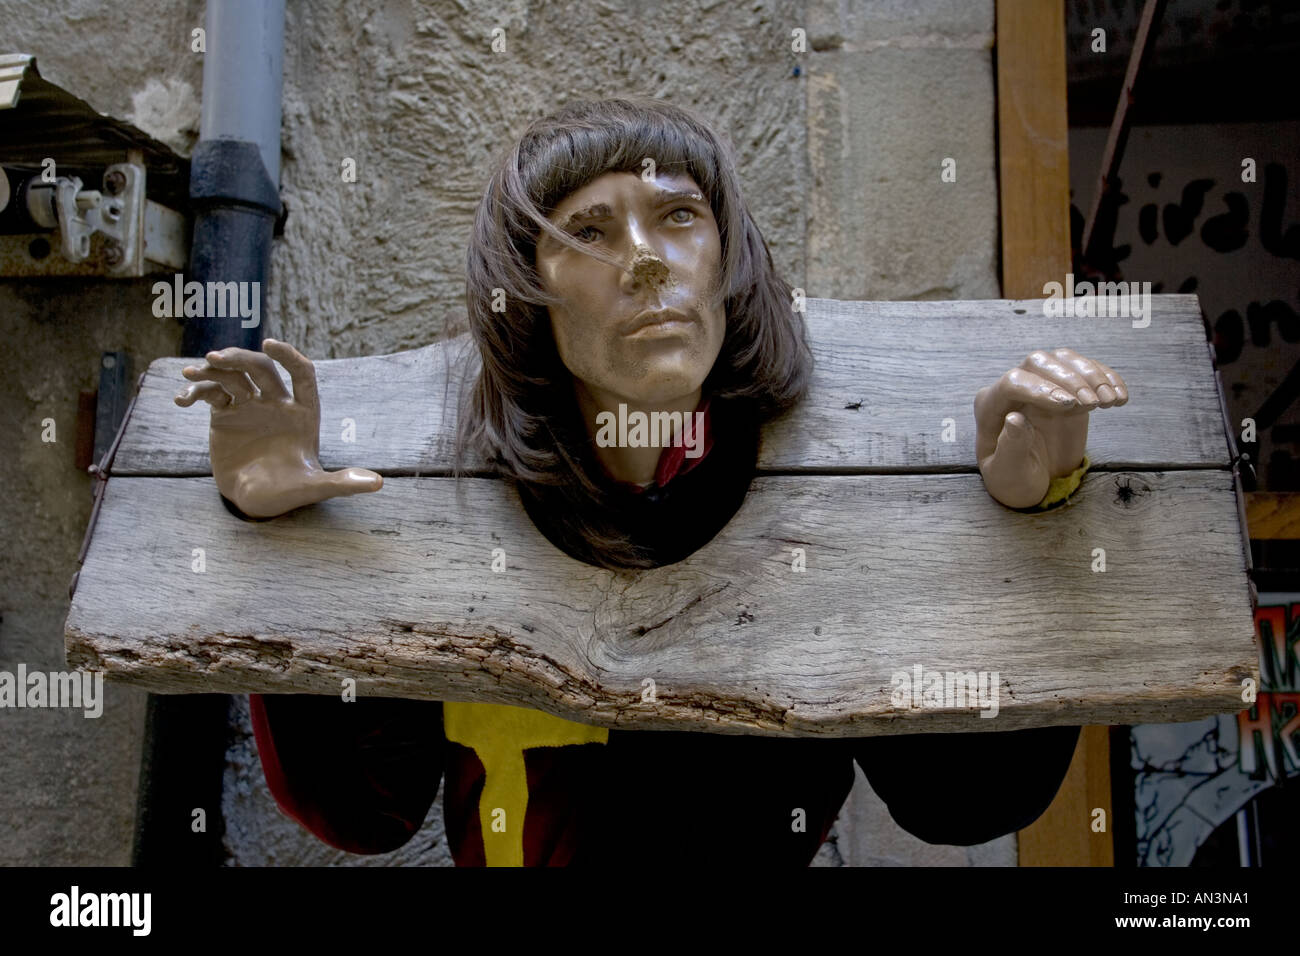 Sculpture of head of man in old wooden stocks in ancient fortified city of Carcassonne southern France Stock Photo